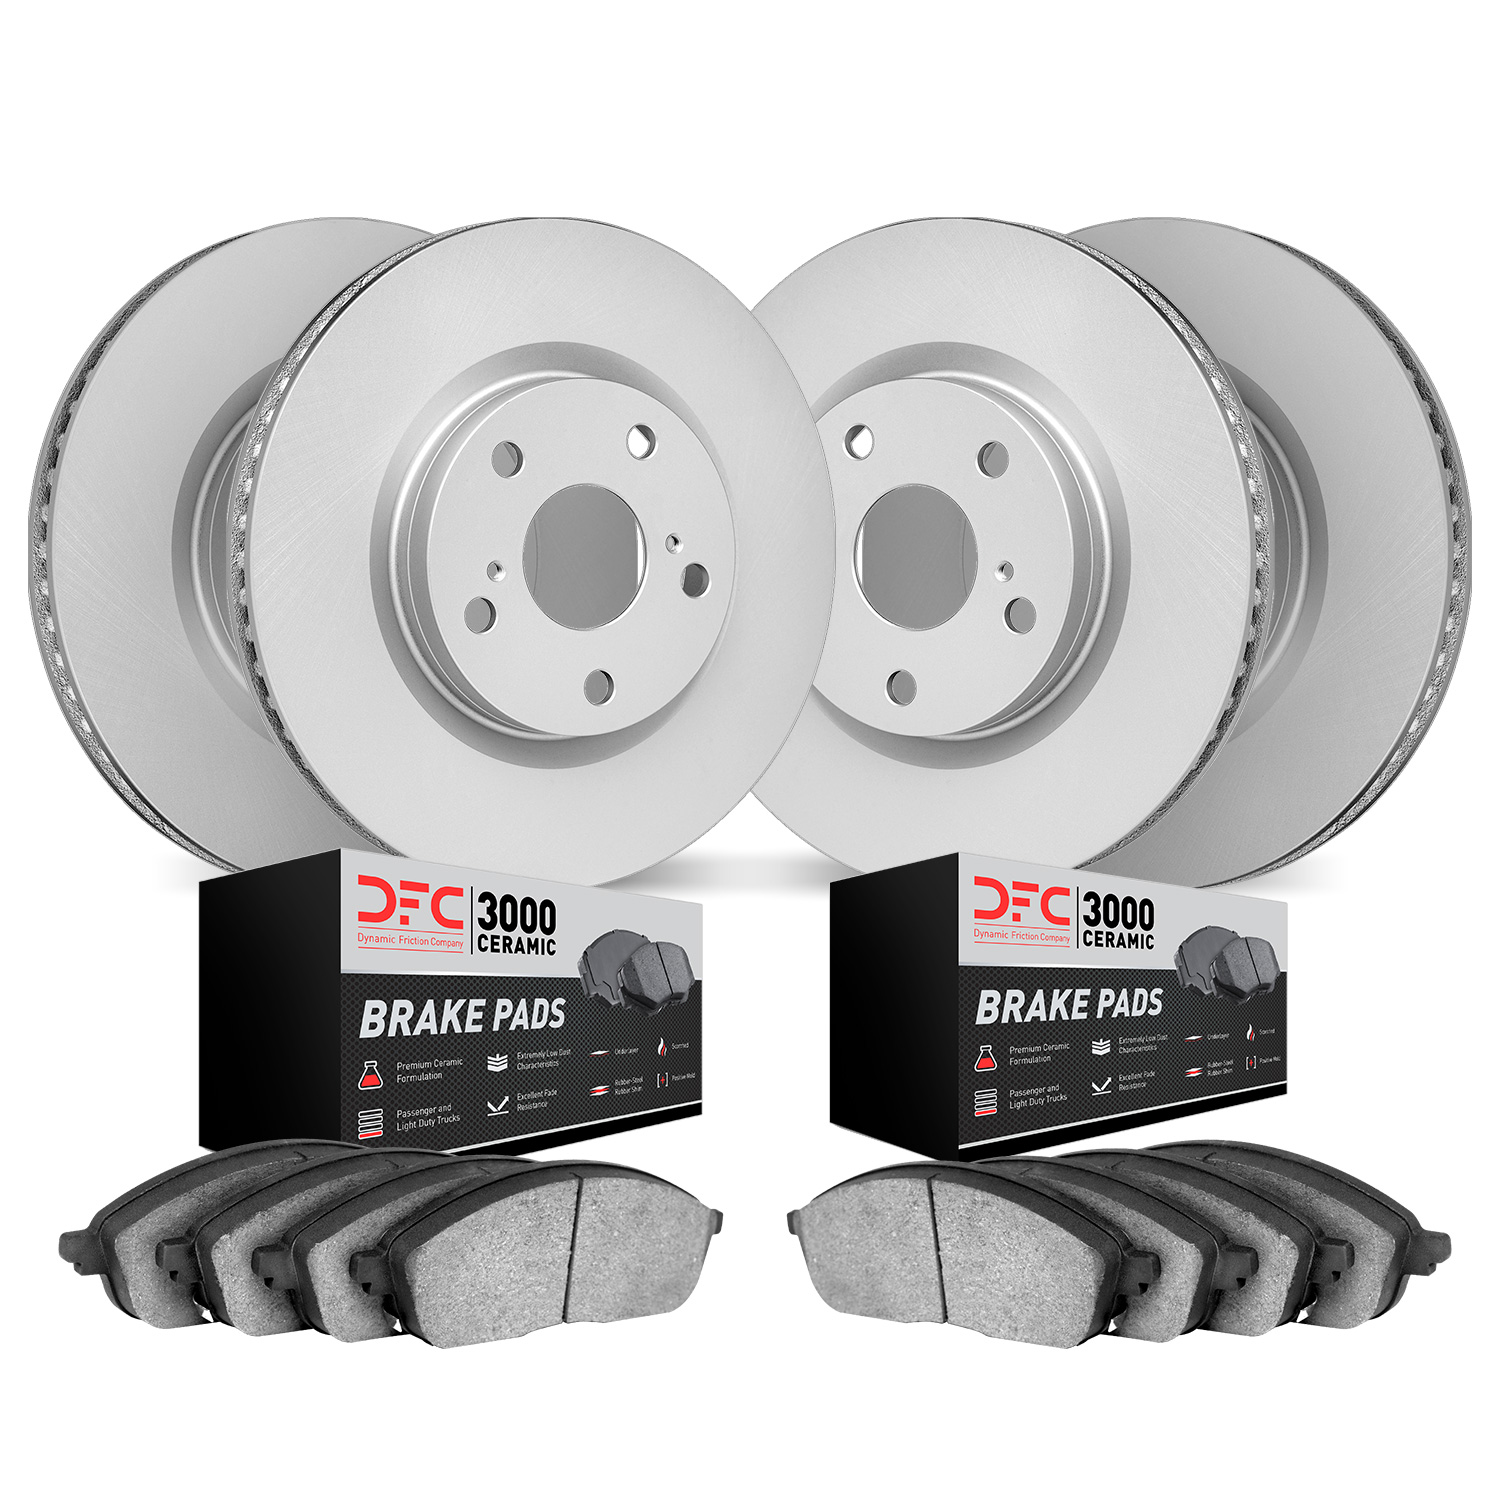 4304-67026 Geospec Brake Rotors with 3000-Series Ceramic Brake Pads Kit, 2003-2011 Infiniti/Nissan, Position: Front and Rear